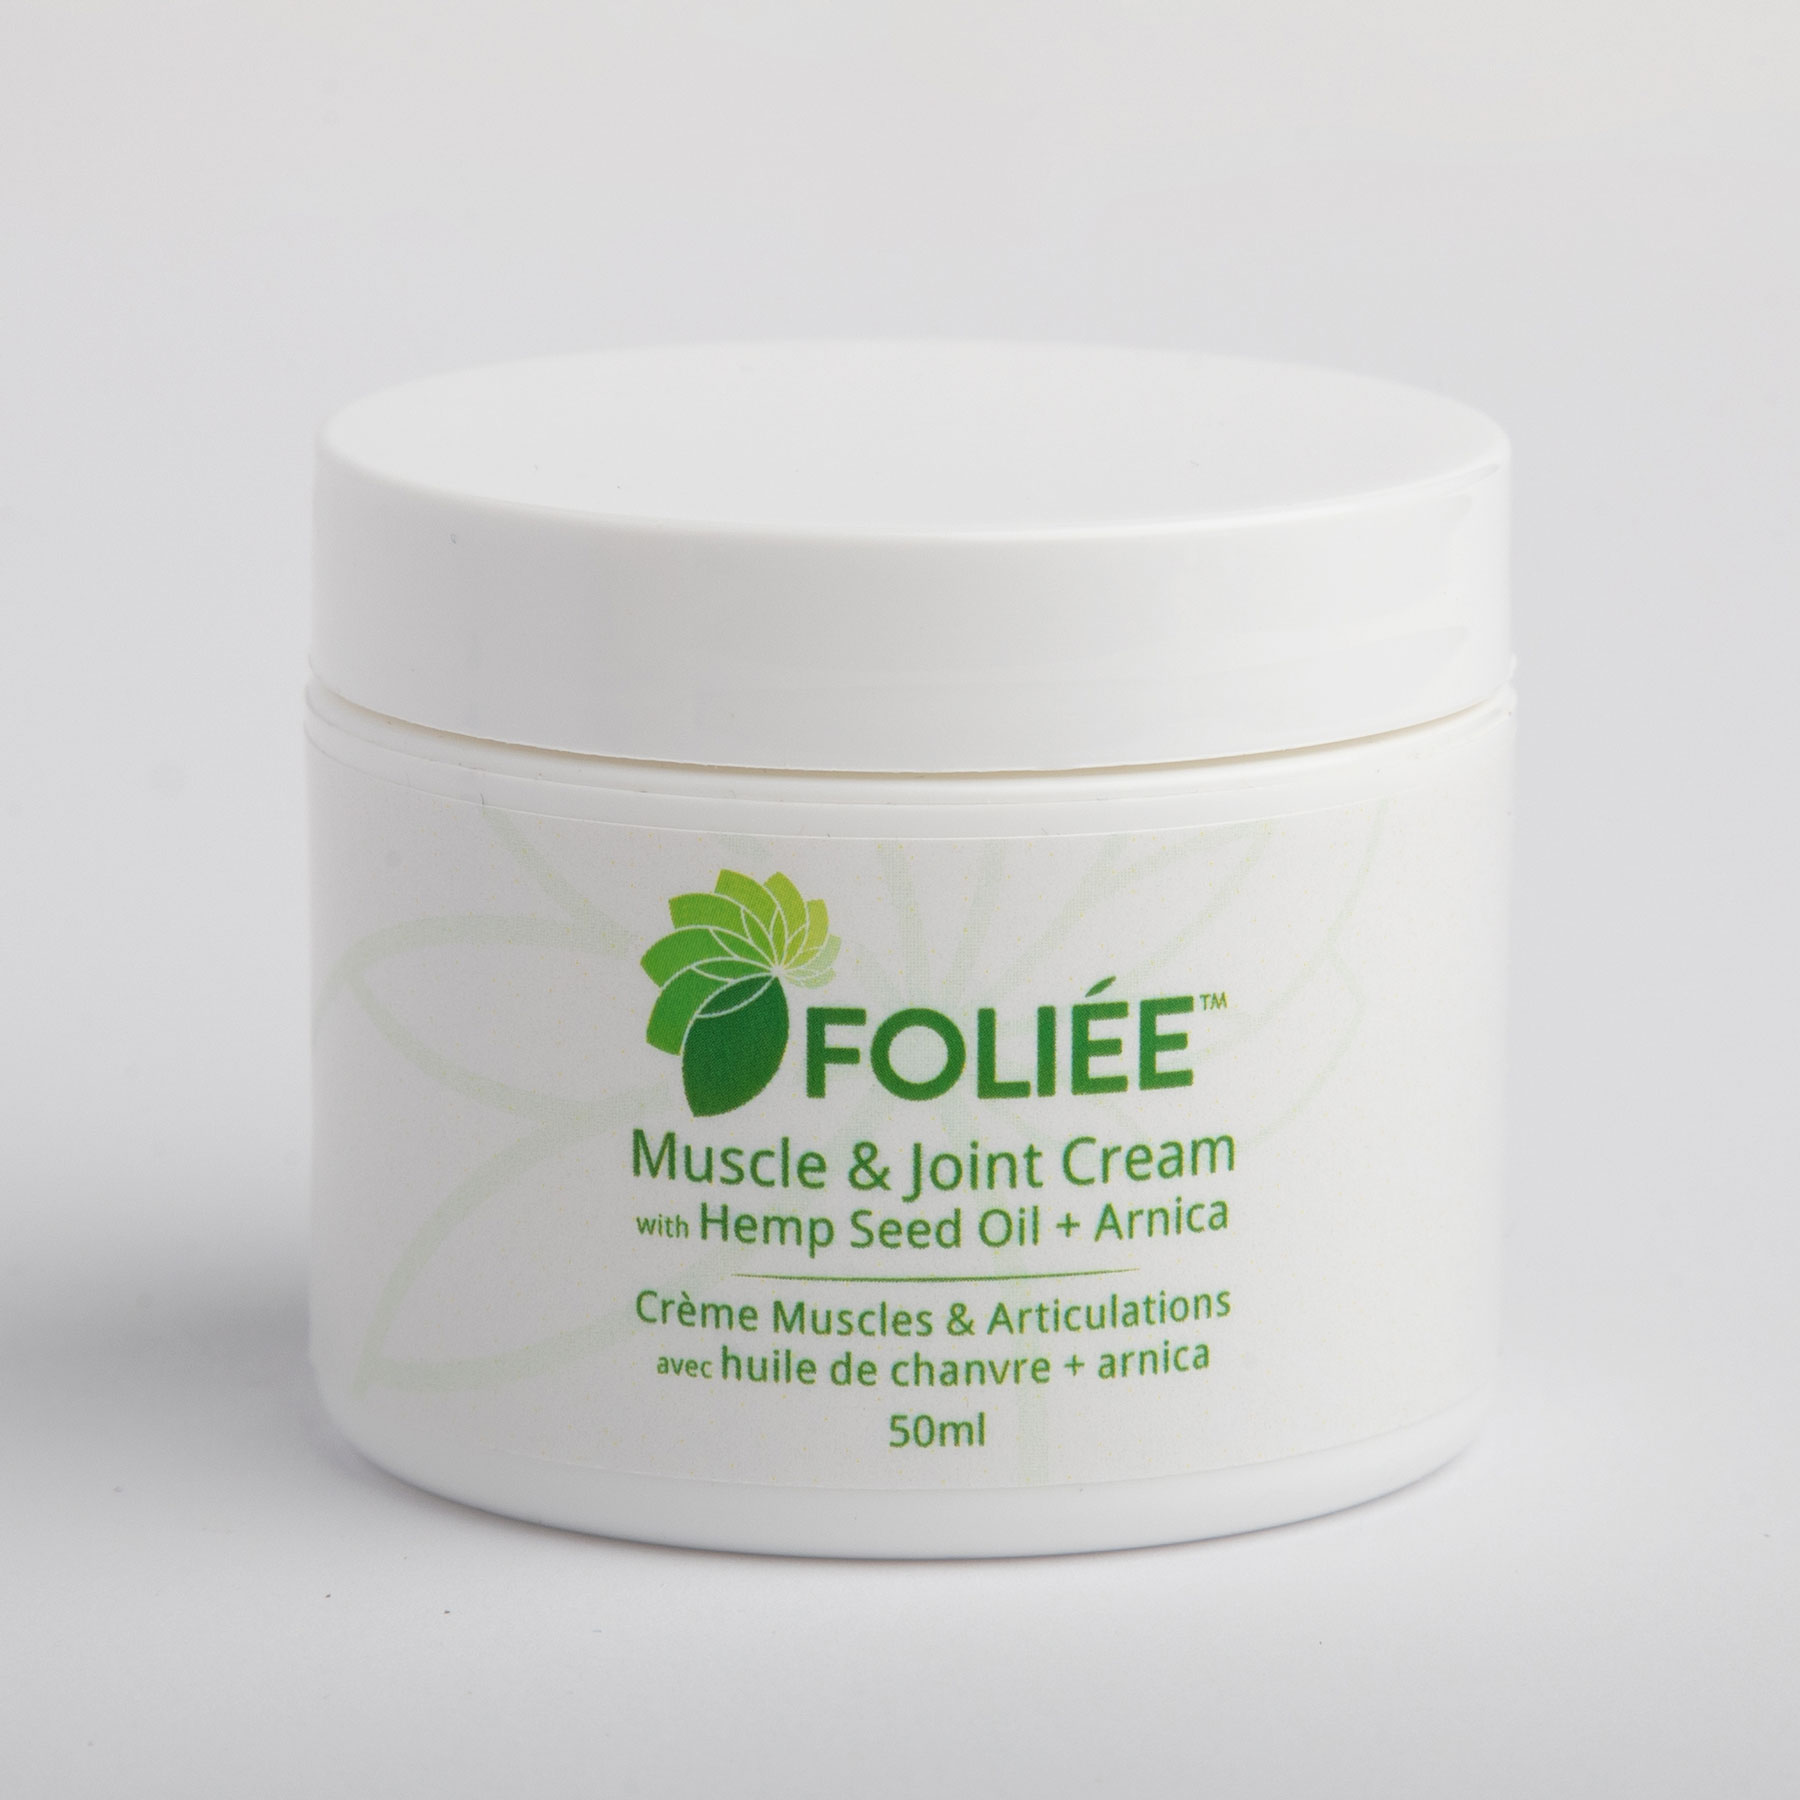 All Natural Muscle & Joint Cream